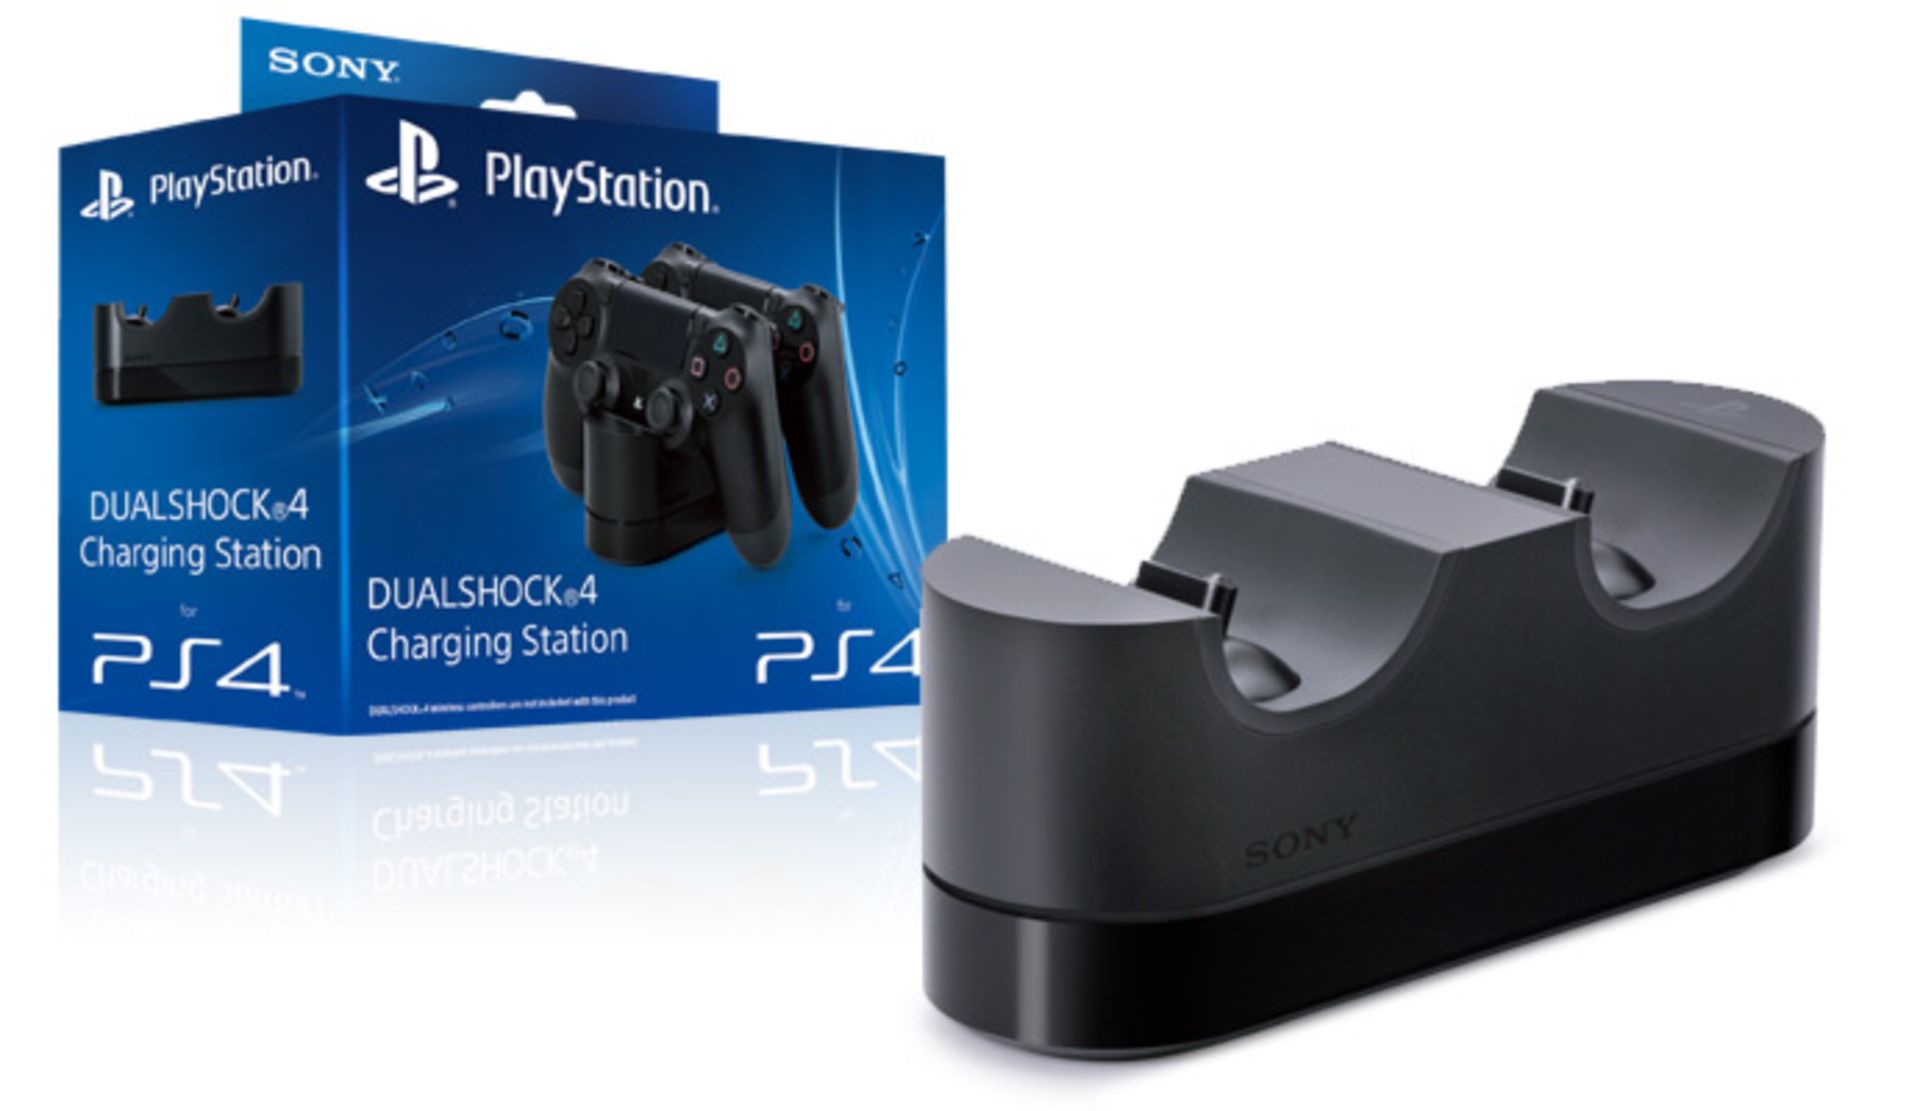 V Grade A Playstation 4 DualShock 4 Charging Station with AC Adaptor and Power Cord